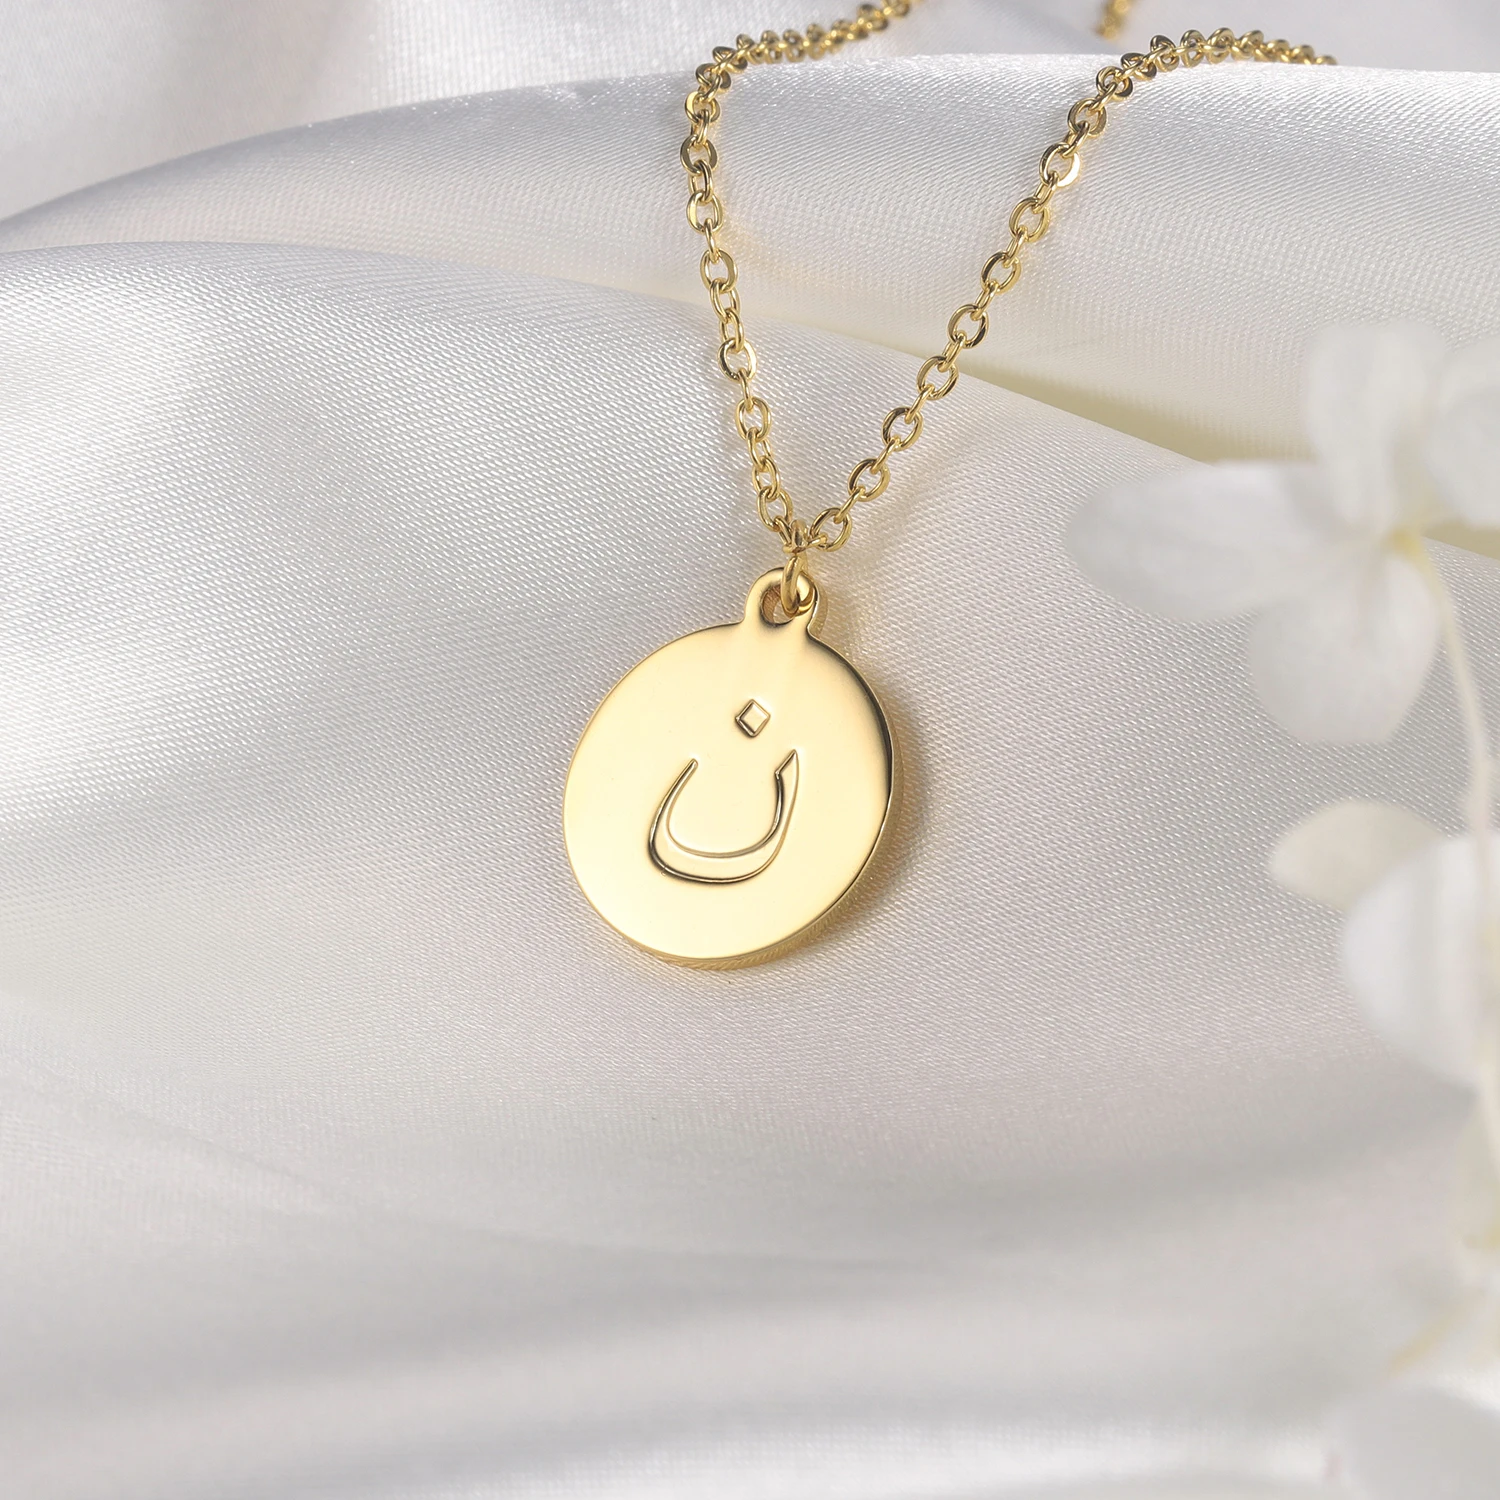 Arabic Letter Necklaces for Women Gold Stainless Steel Personalized Choker Necklace Coin Pendant Foer Women Jewelry Gifts